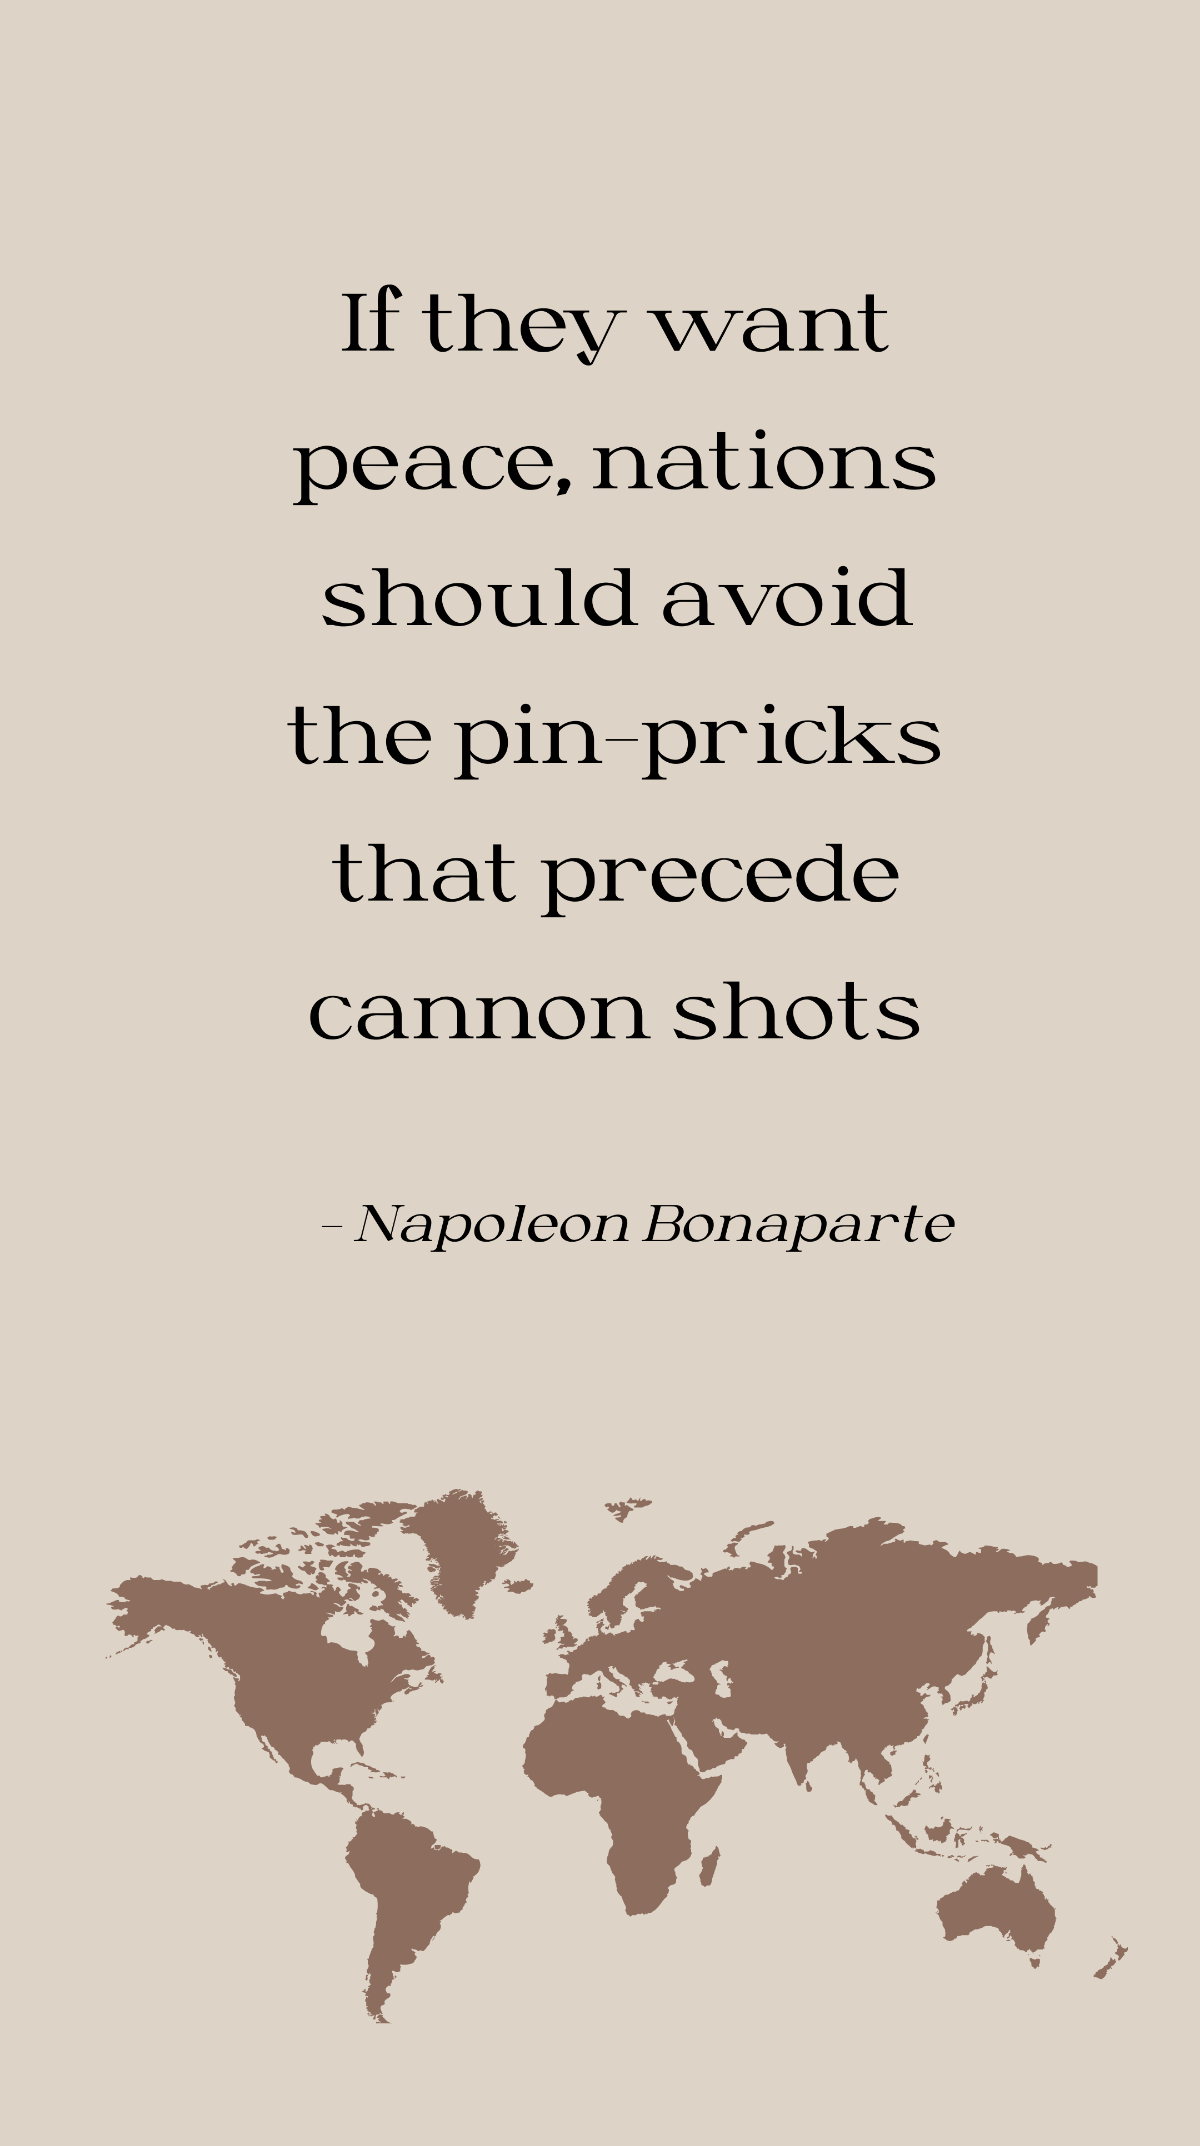 Napoleon Bonaparte - If they want peace, nations should avoid the pin-pricks that precede cannon shots